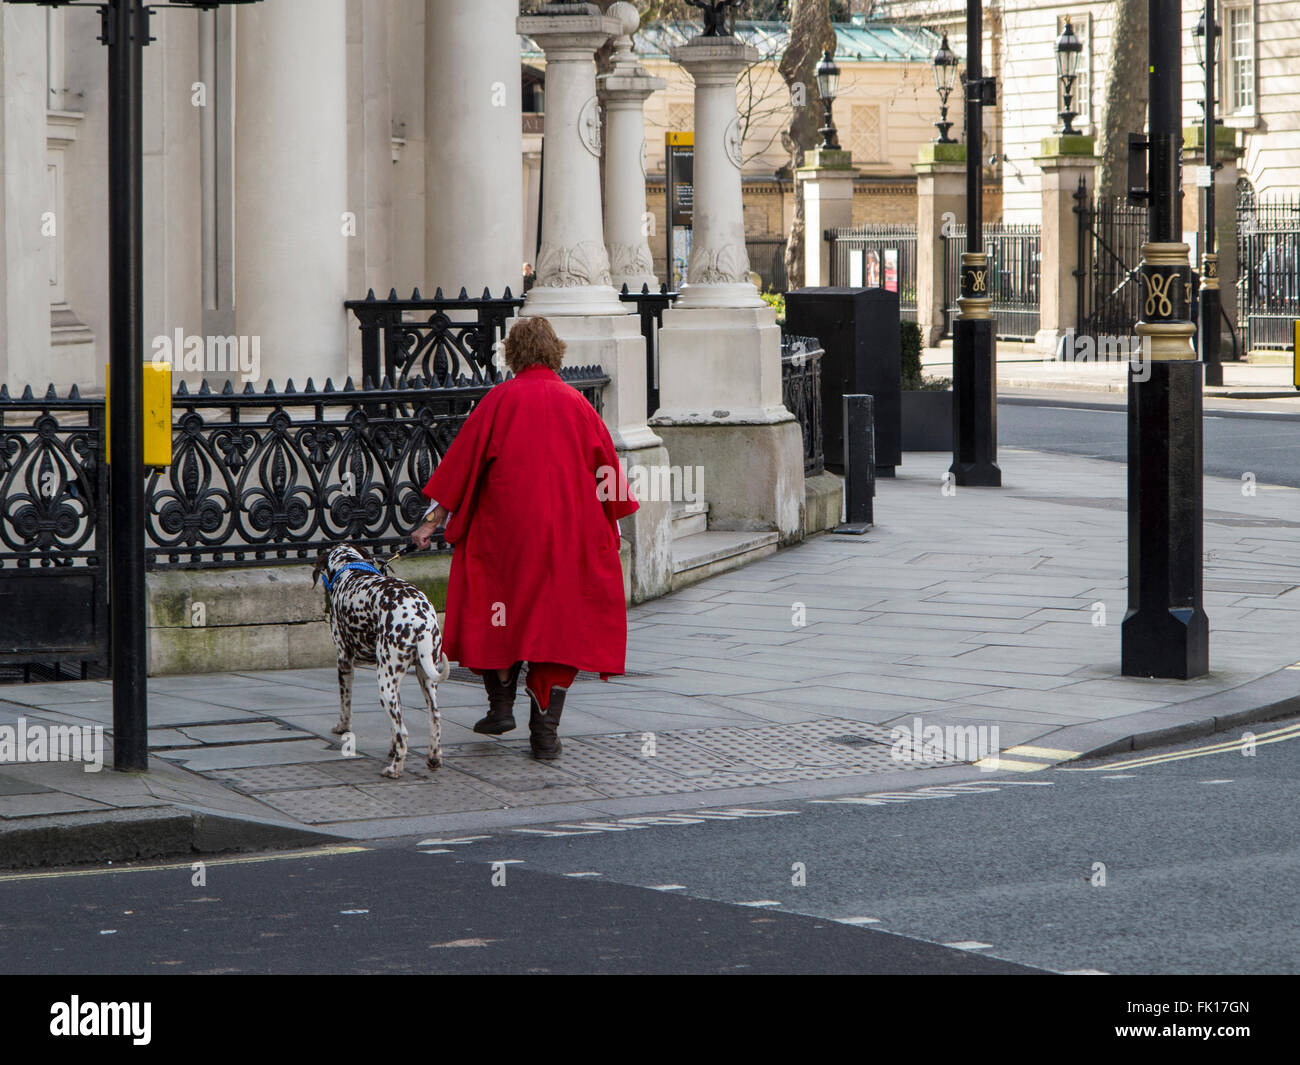 A lady in a red coat with a dalmation dog in central london Stock Photo